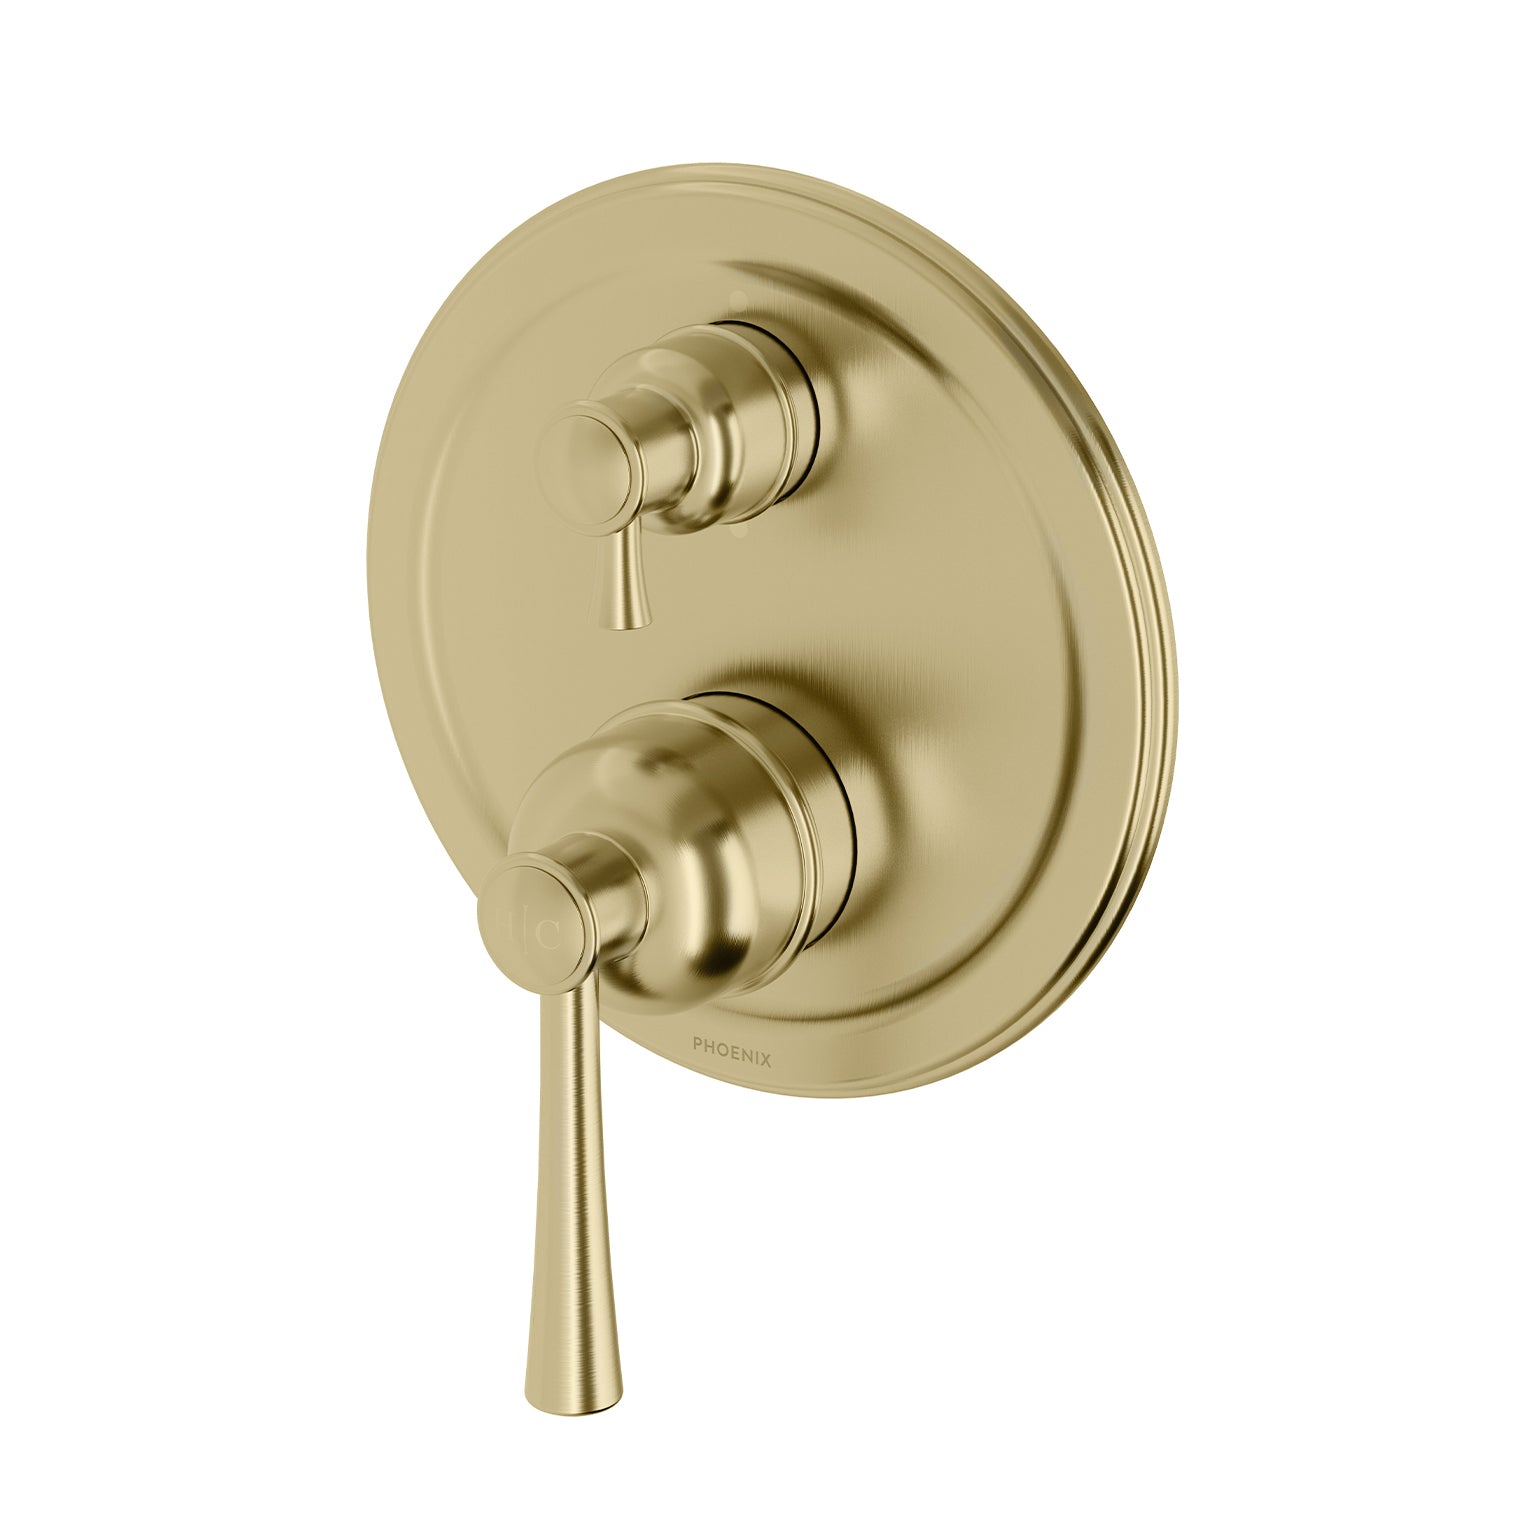 PHOENIX CROMFORD SWITCHMIX SHOWER / BATH DIVERTER MIXER FIT-OFF AND ROUGH-IN KIT BRUSHED GOLD